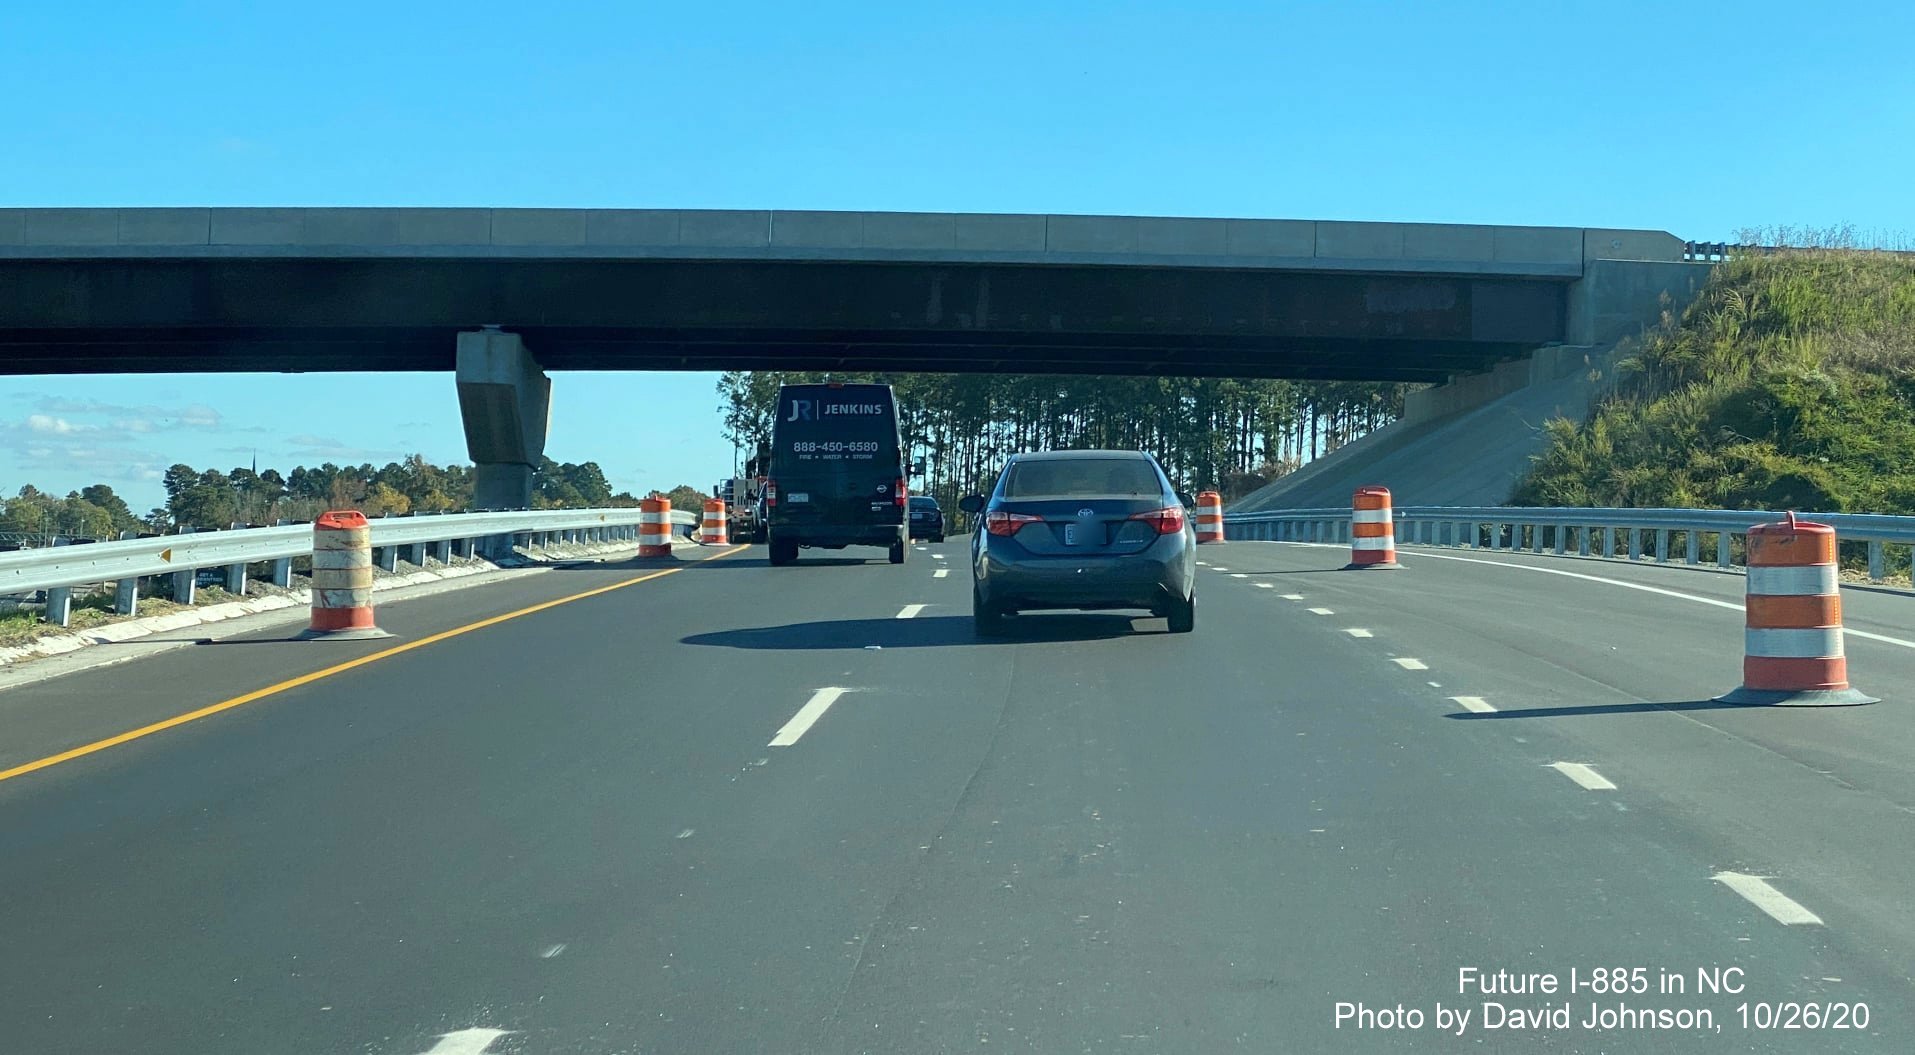 Image of traffic on US 70 East (future exit ramp from I-885 South East End Connector) heading over flyover ramp that will carry US 70 West traffic to Connector in Durham, by David Johnson October 2020